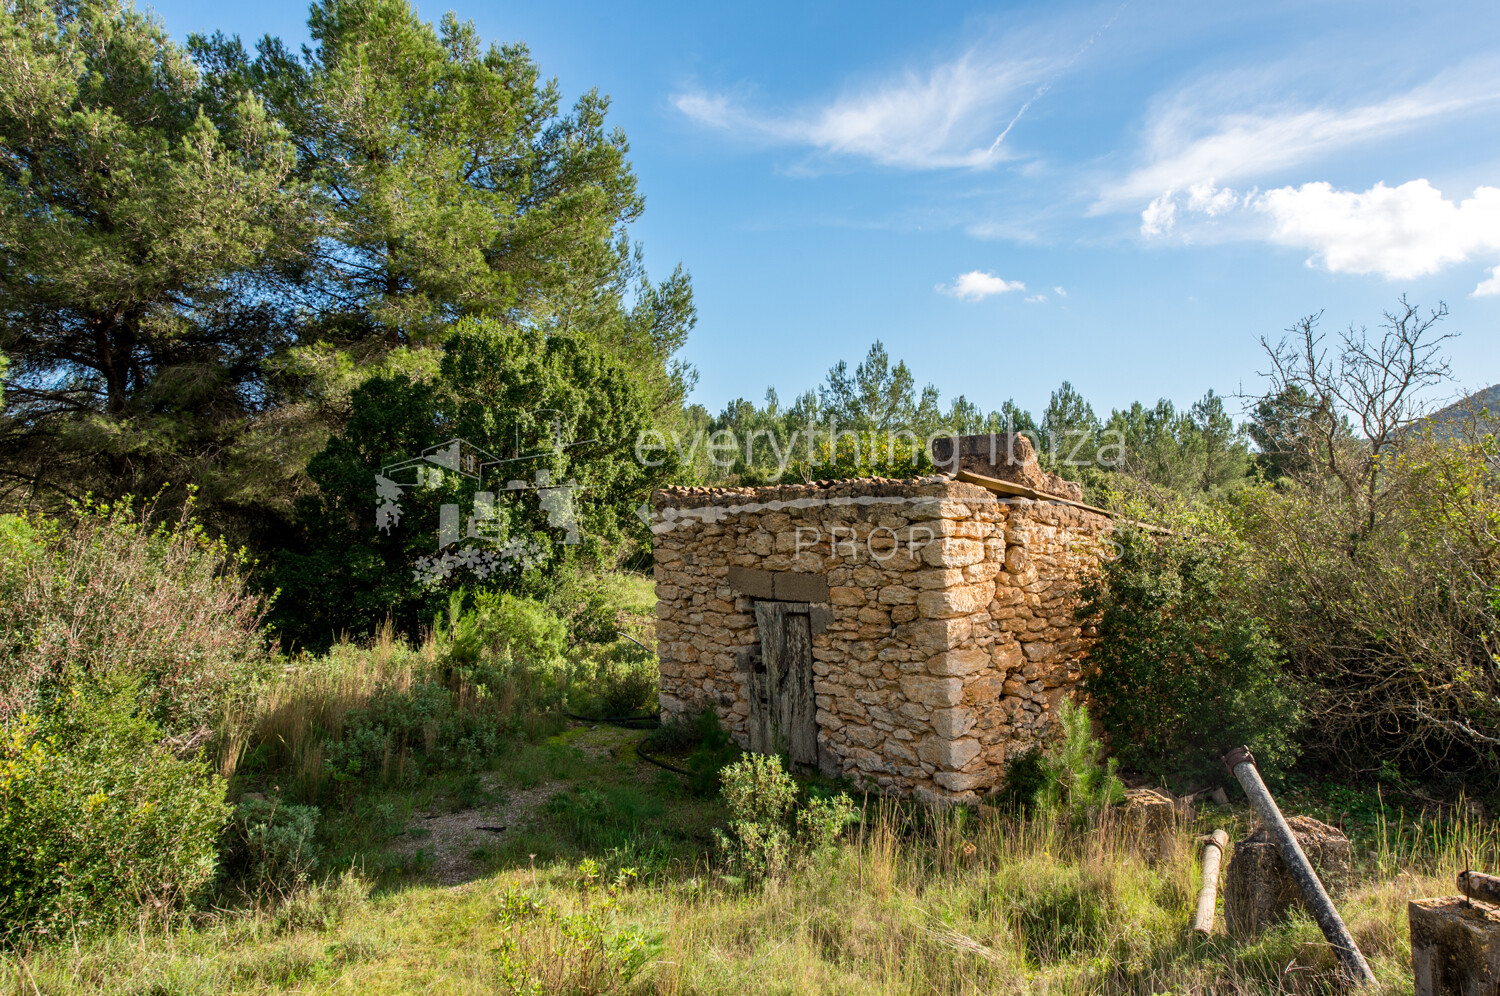 Authentic Ibiza Finca Ideal for Renovation on a Huge Rural Plot, ref. 1525, for sale in Ibiza by everything ibiza Properties